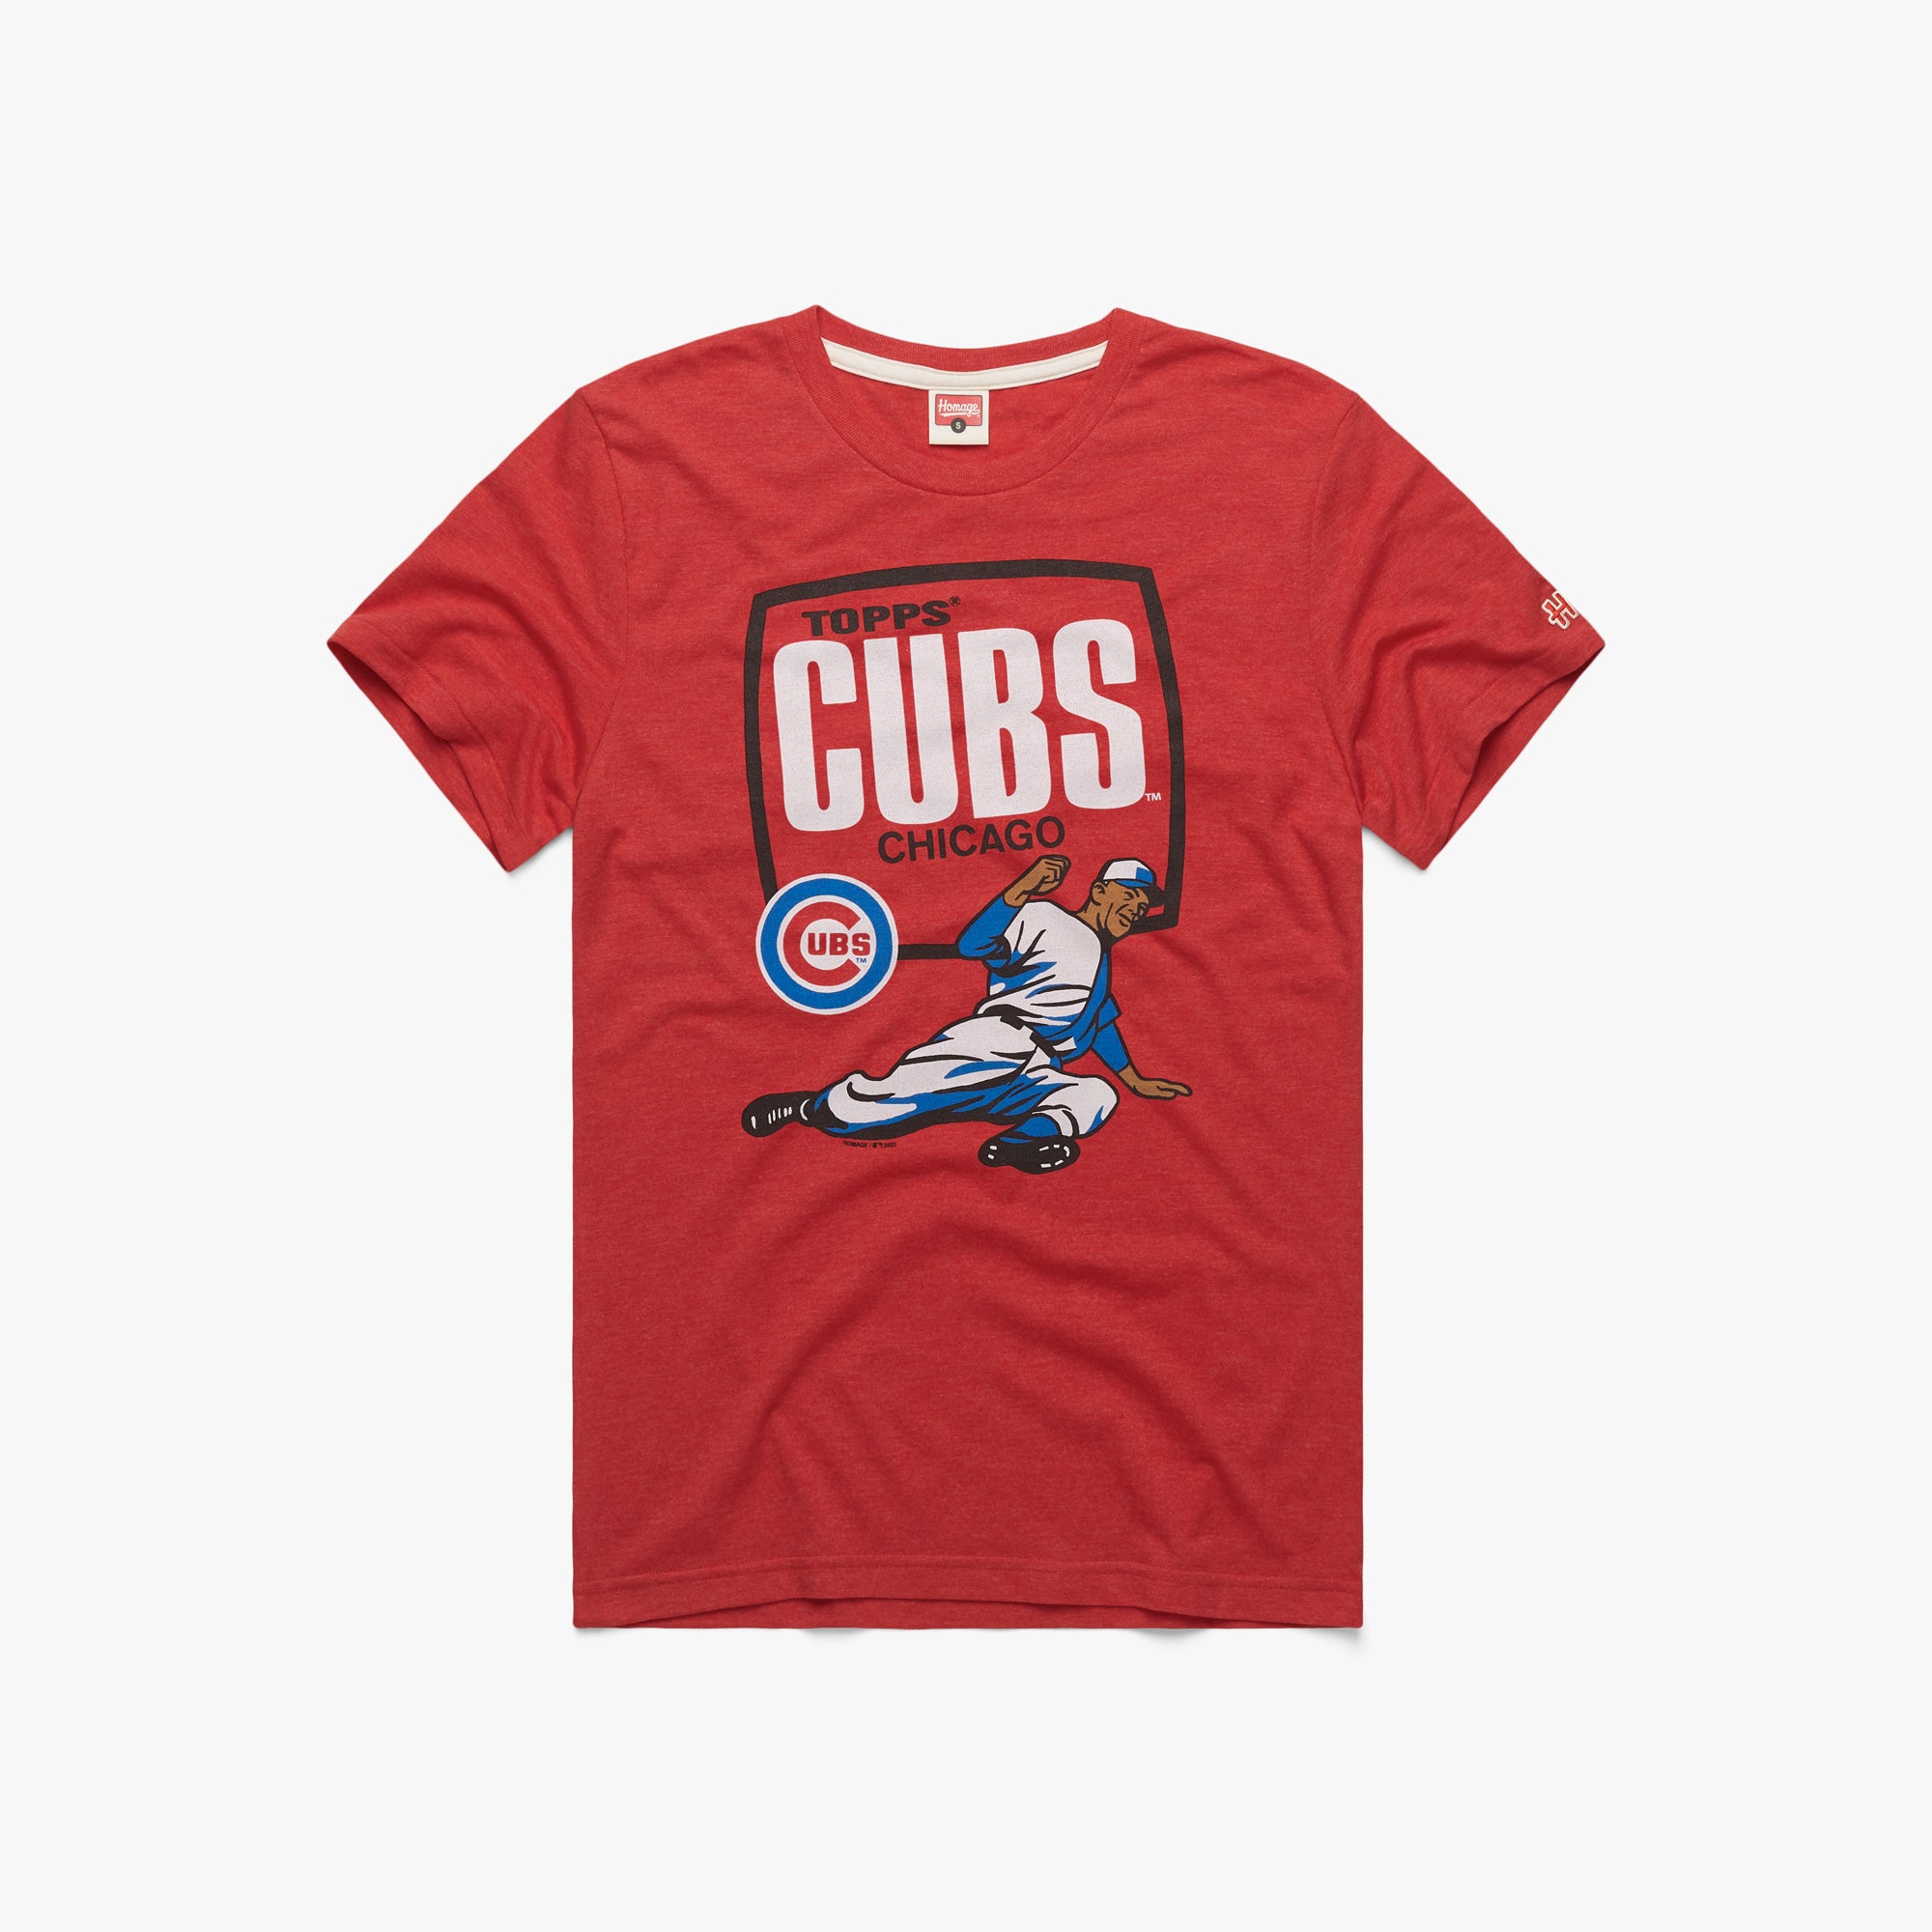 MLB x Topps Chicago Cubs T-Shirt from Homage. | Red | Vintage Apparel from Homage.